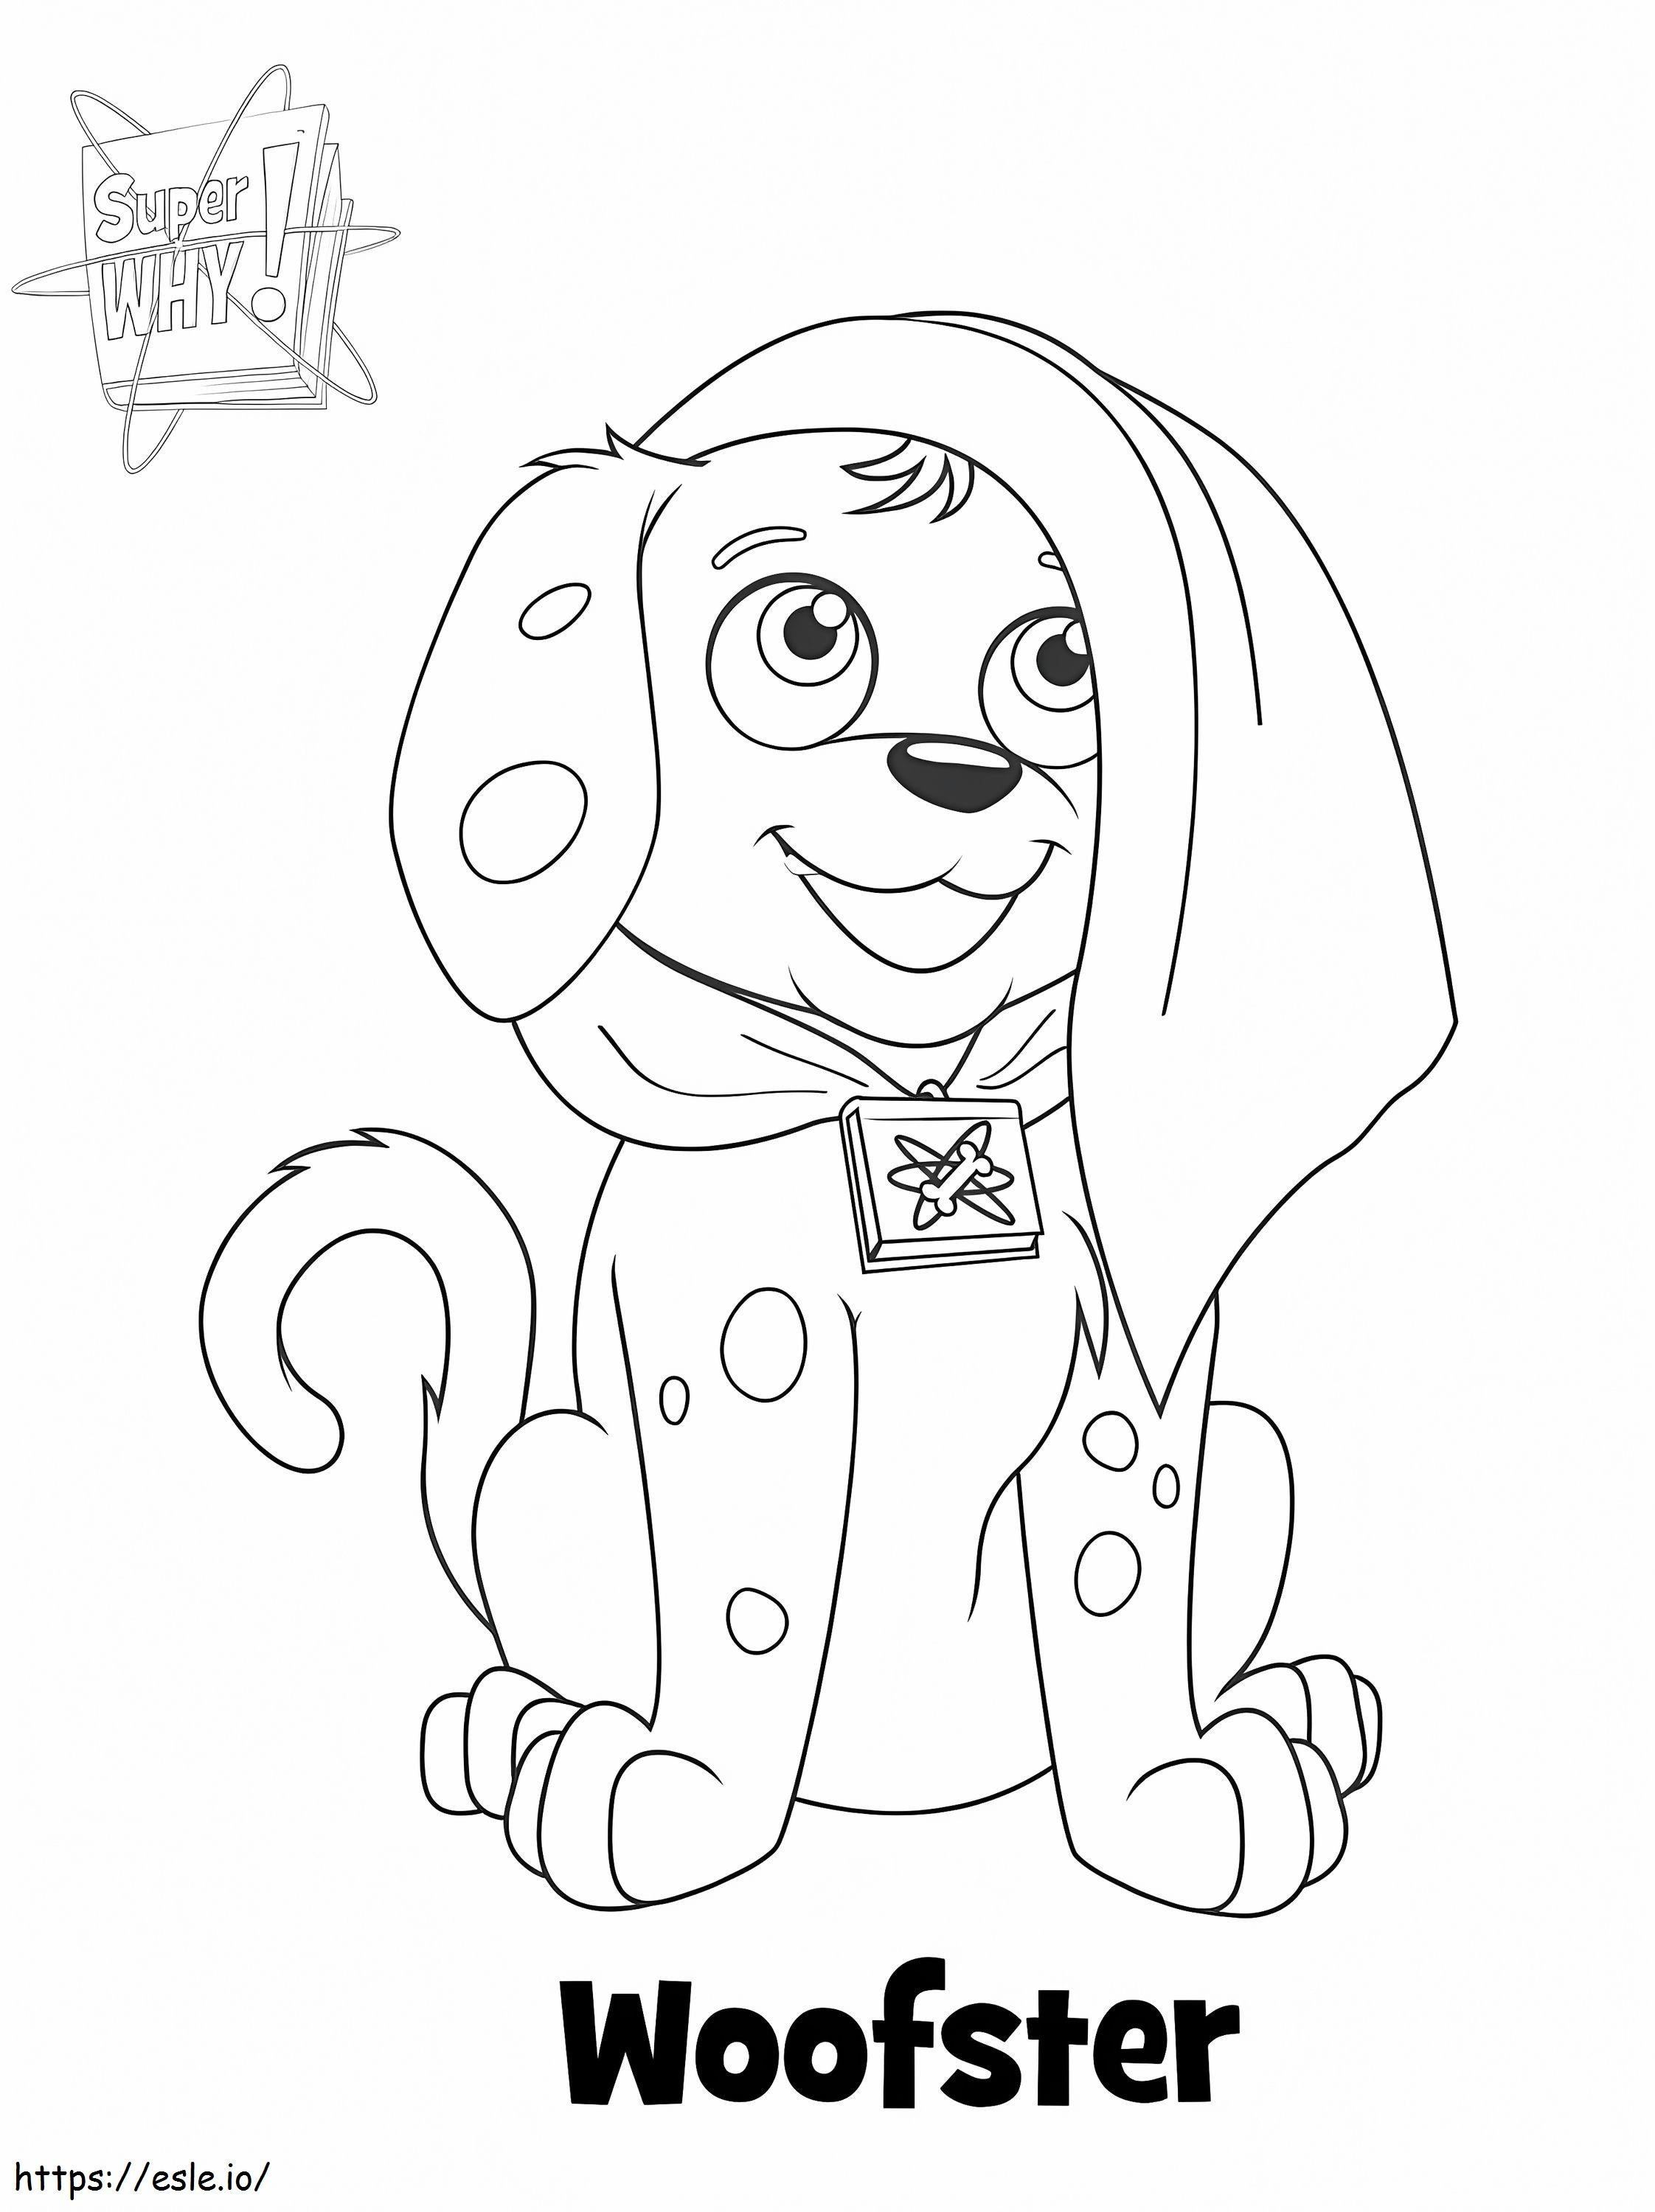 Woofwoof coloring page